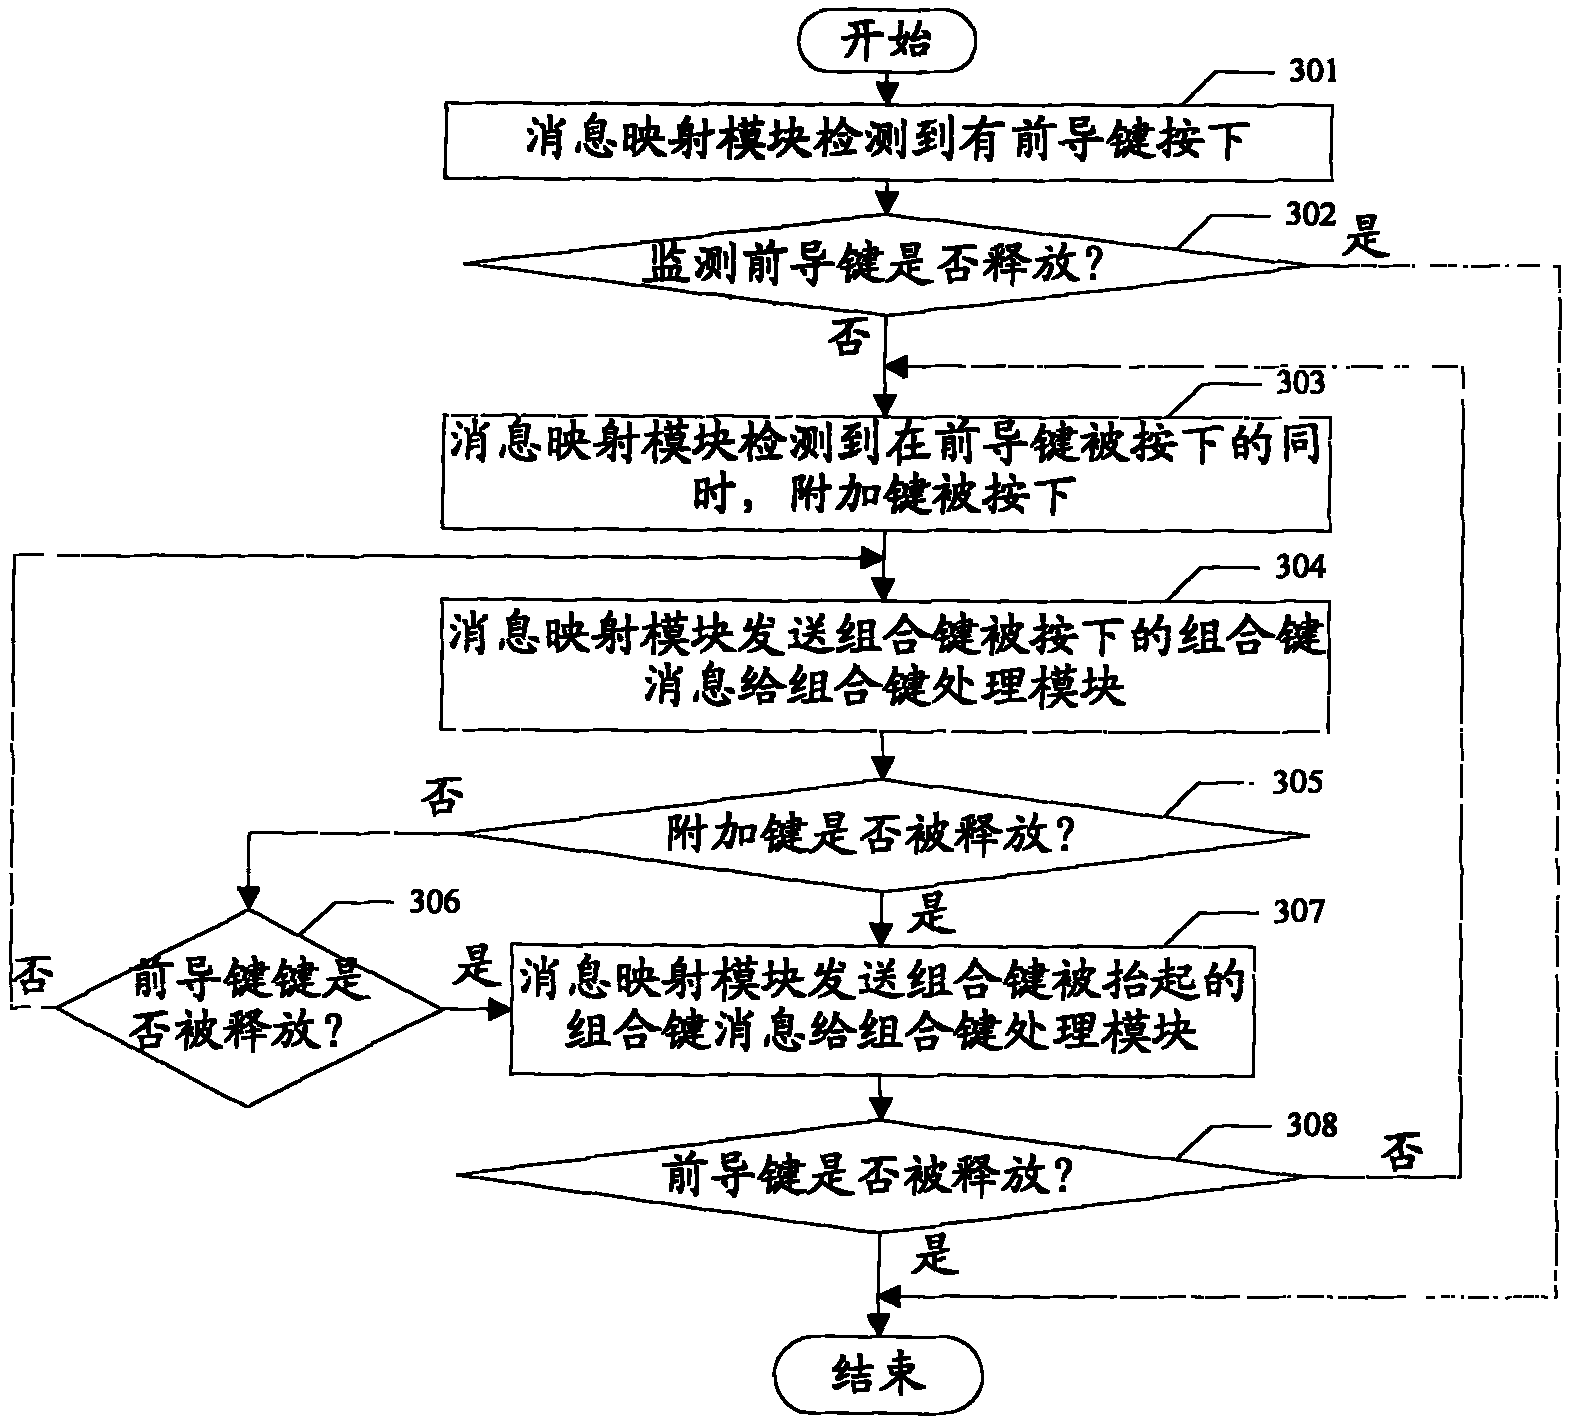 Multi-contact input method and device based on touch screen